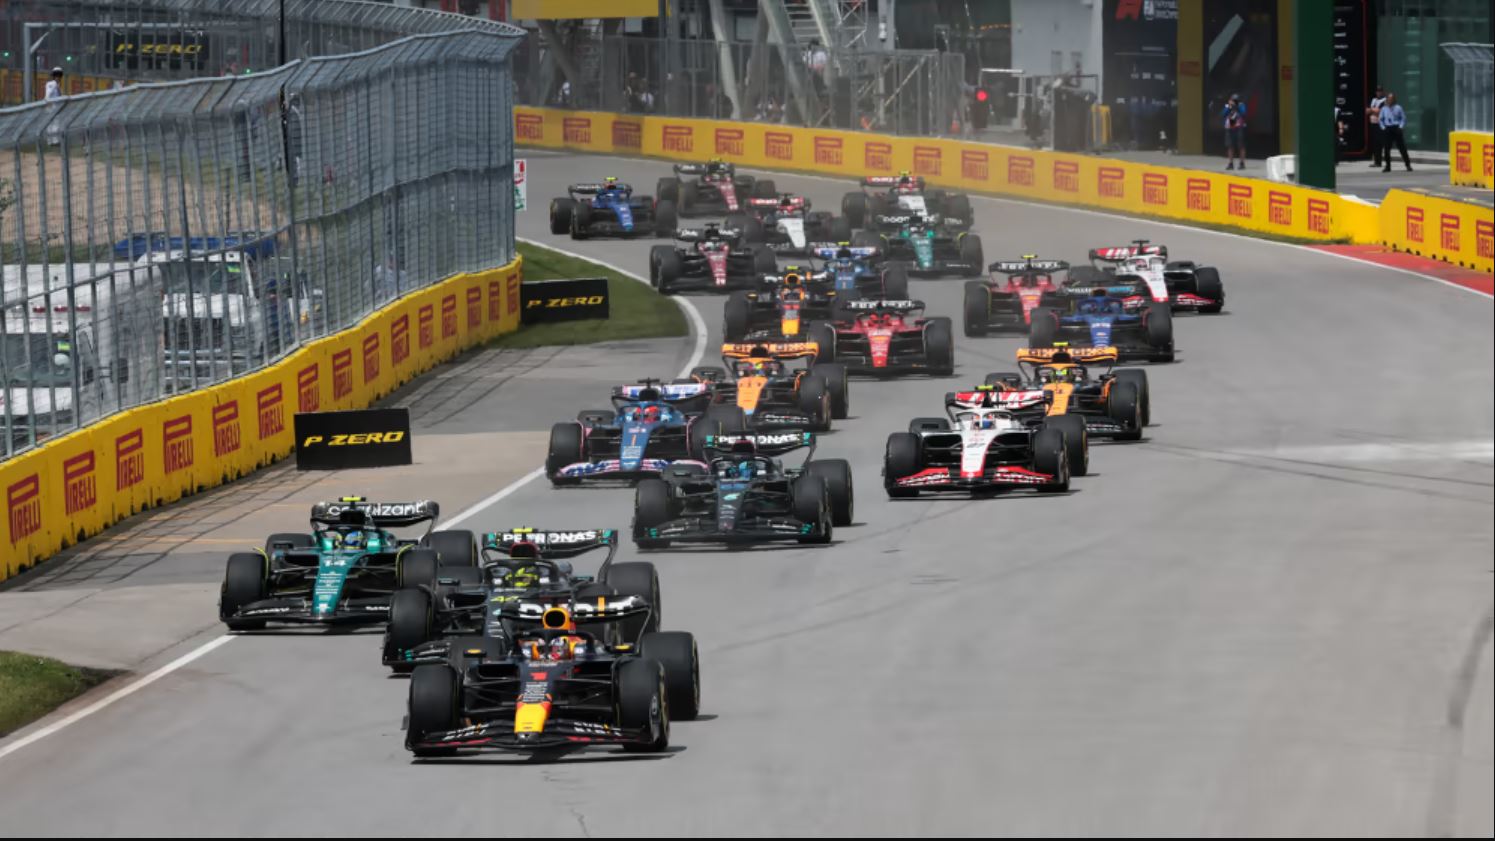 Verstappen wins Canadian GP to claim Red Bull’s 100th victory - Image Credit: formula1.com